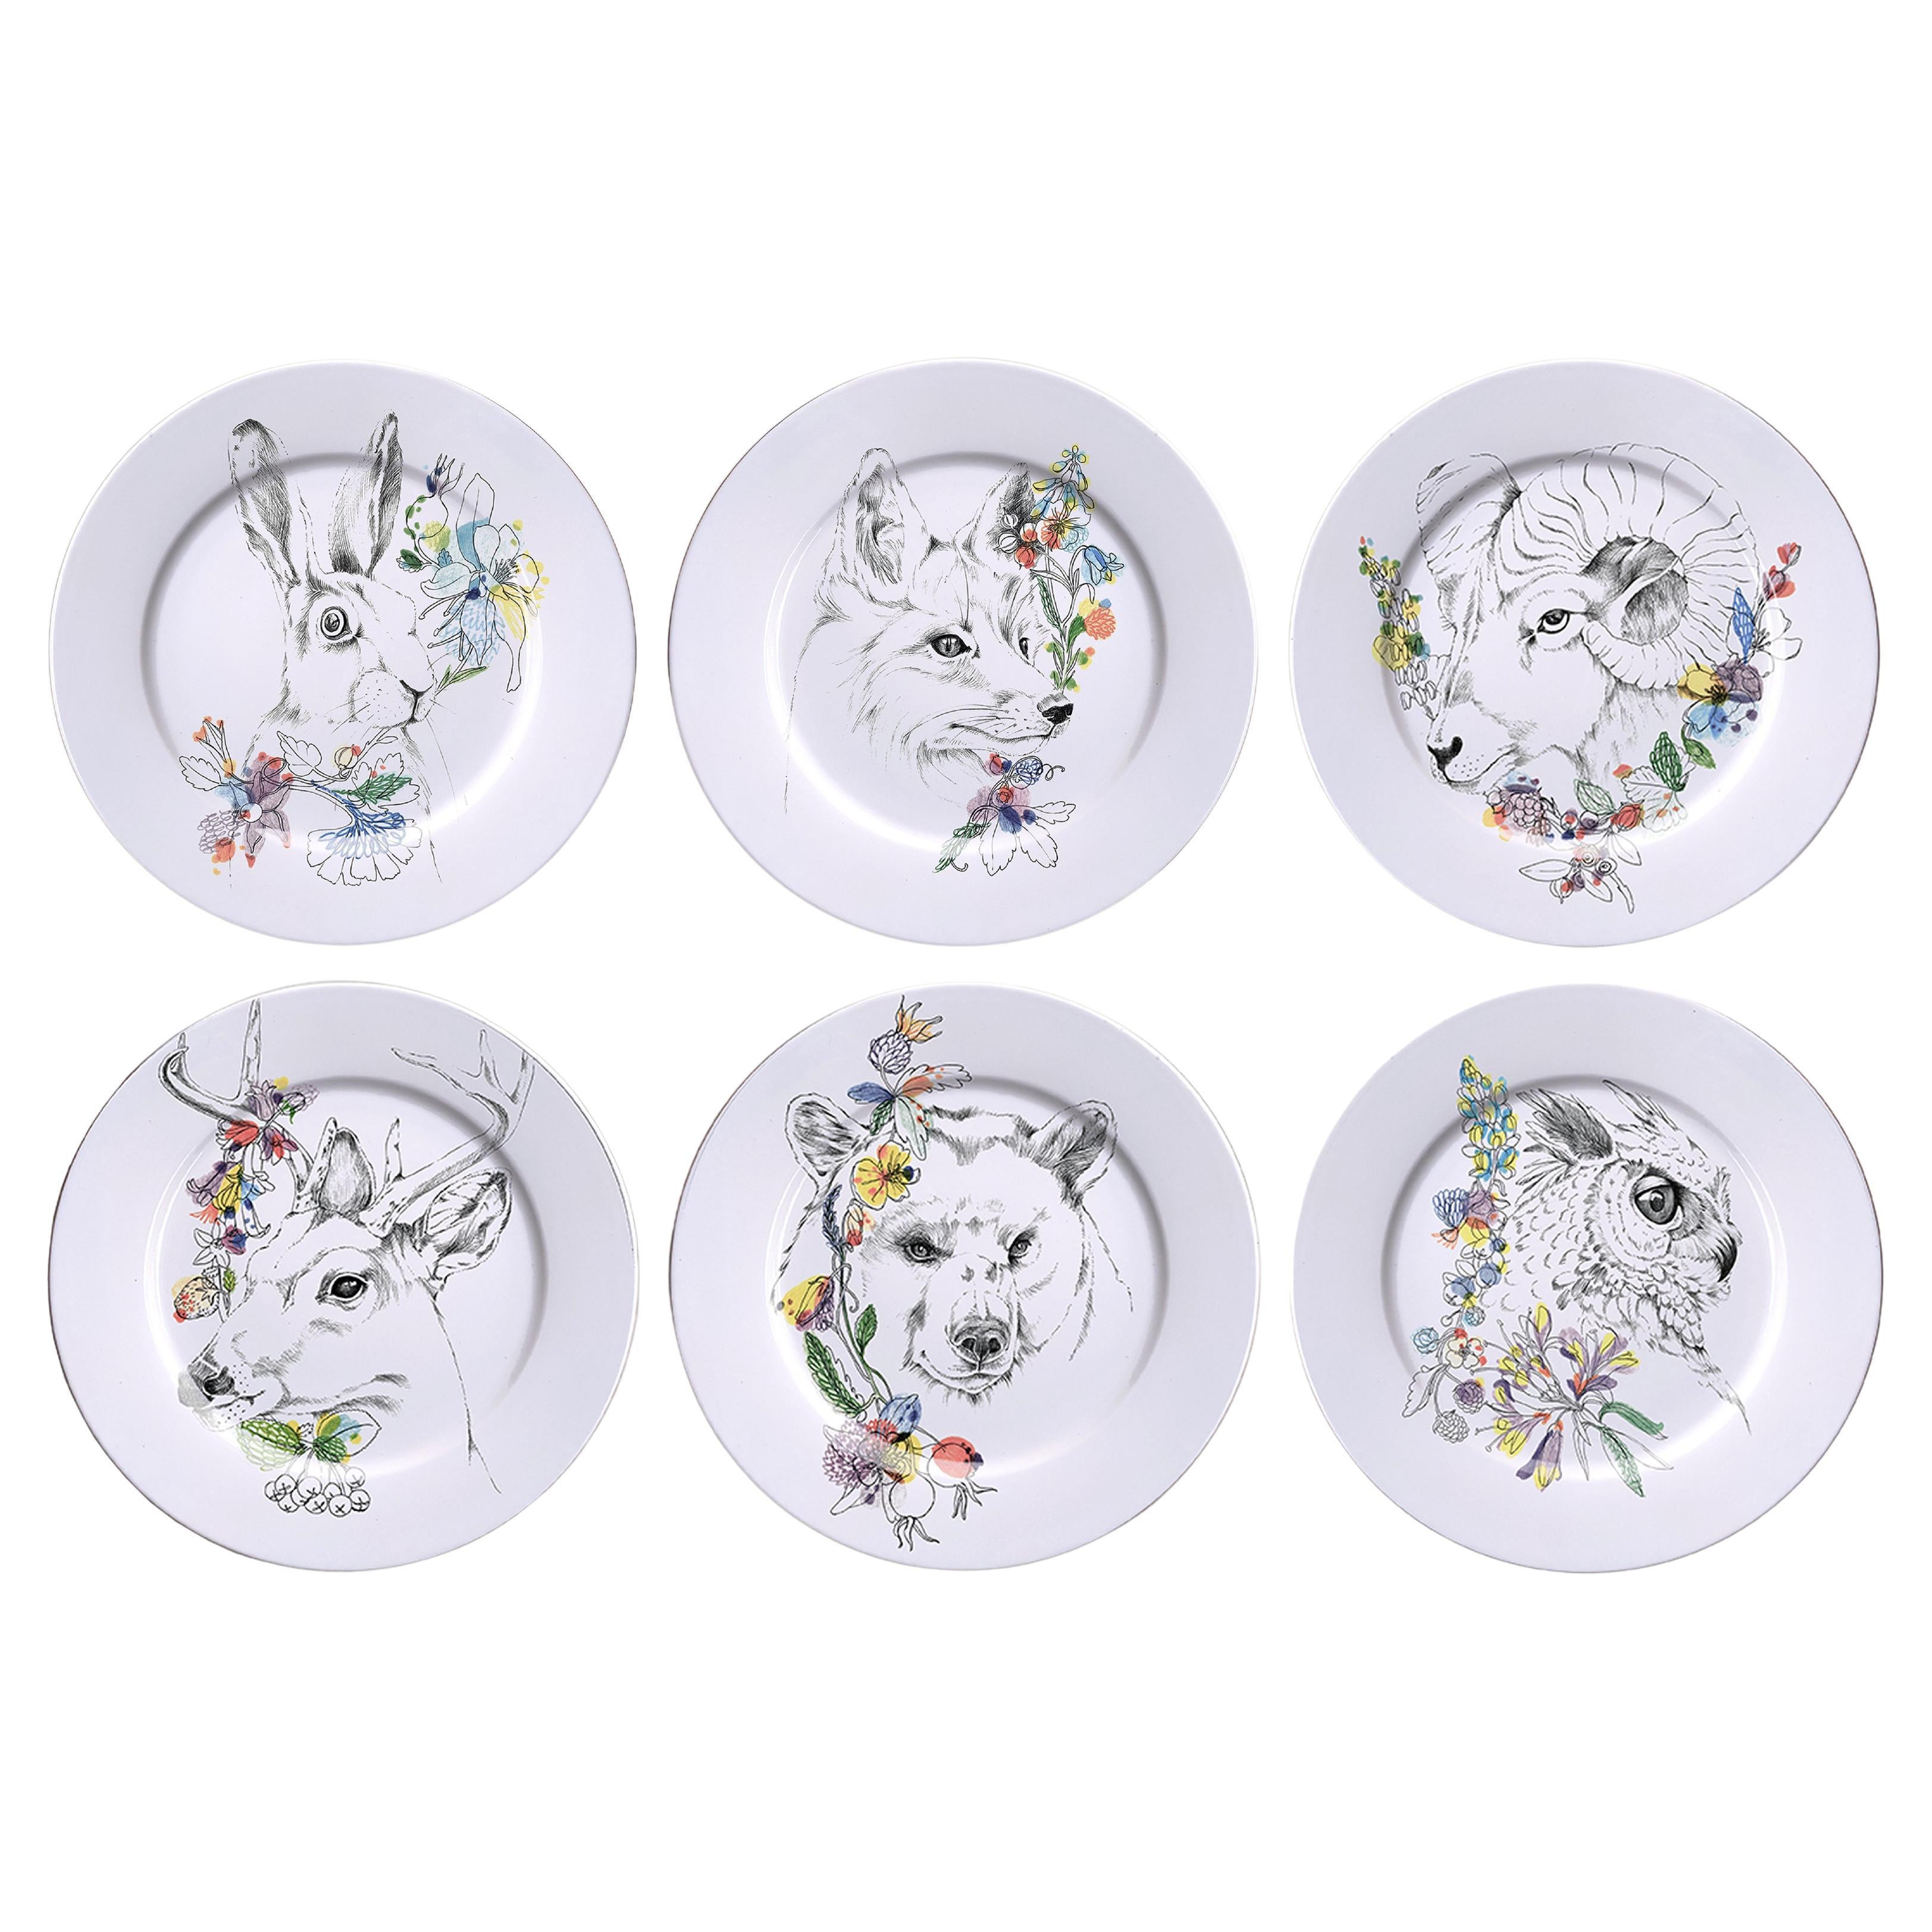 Ode to the Woods, Six Contemporary Porcelain Dinner Plates with Animals&Flowers